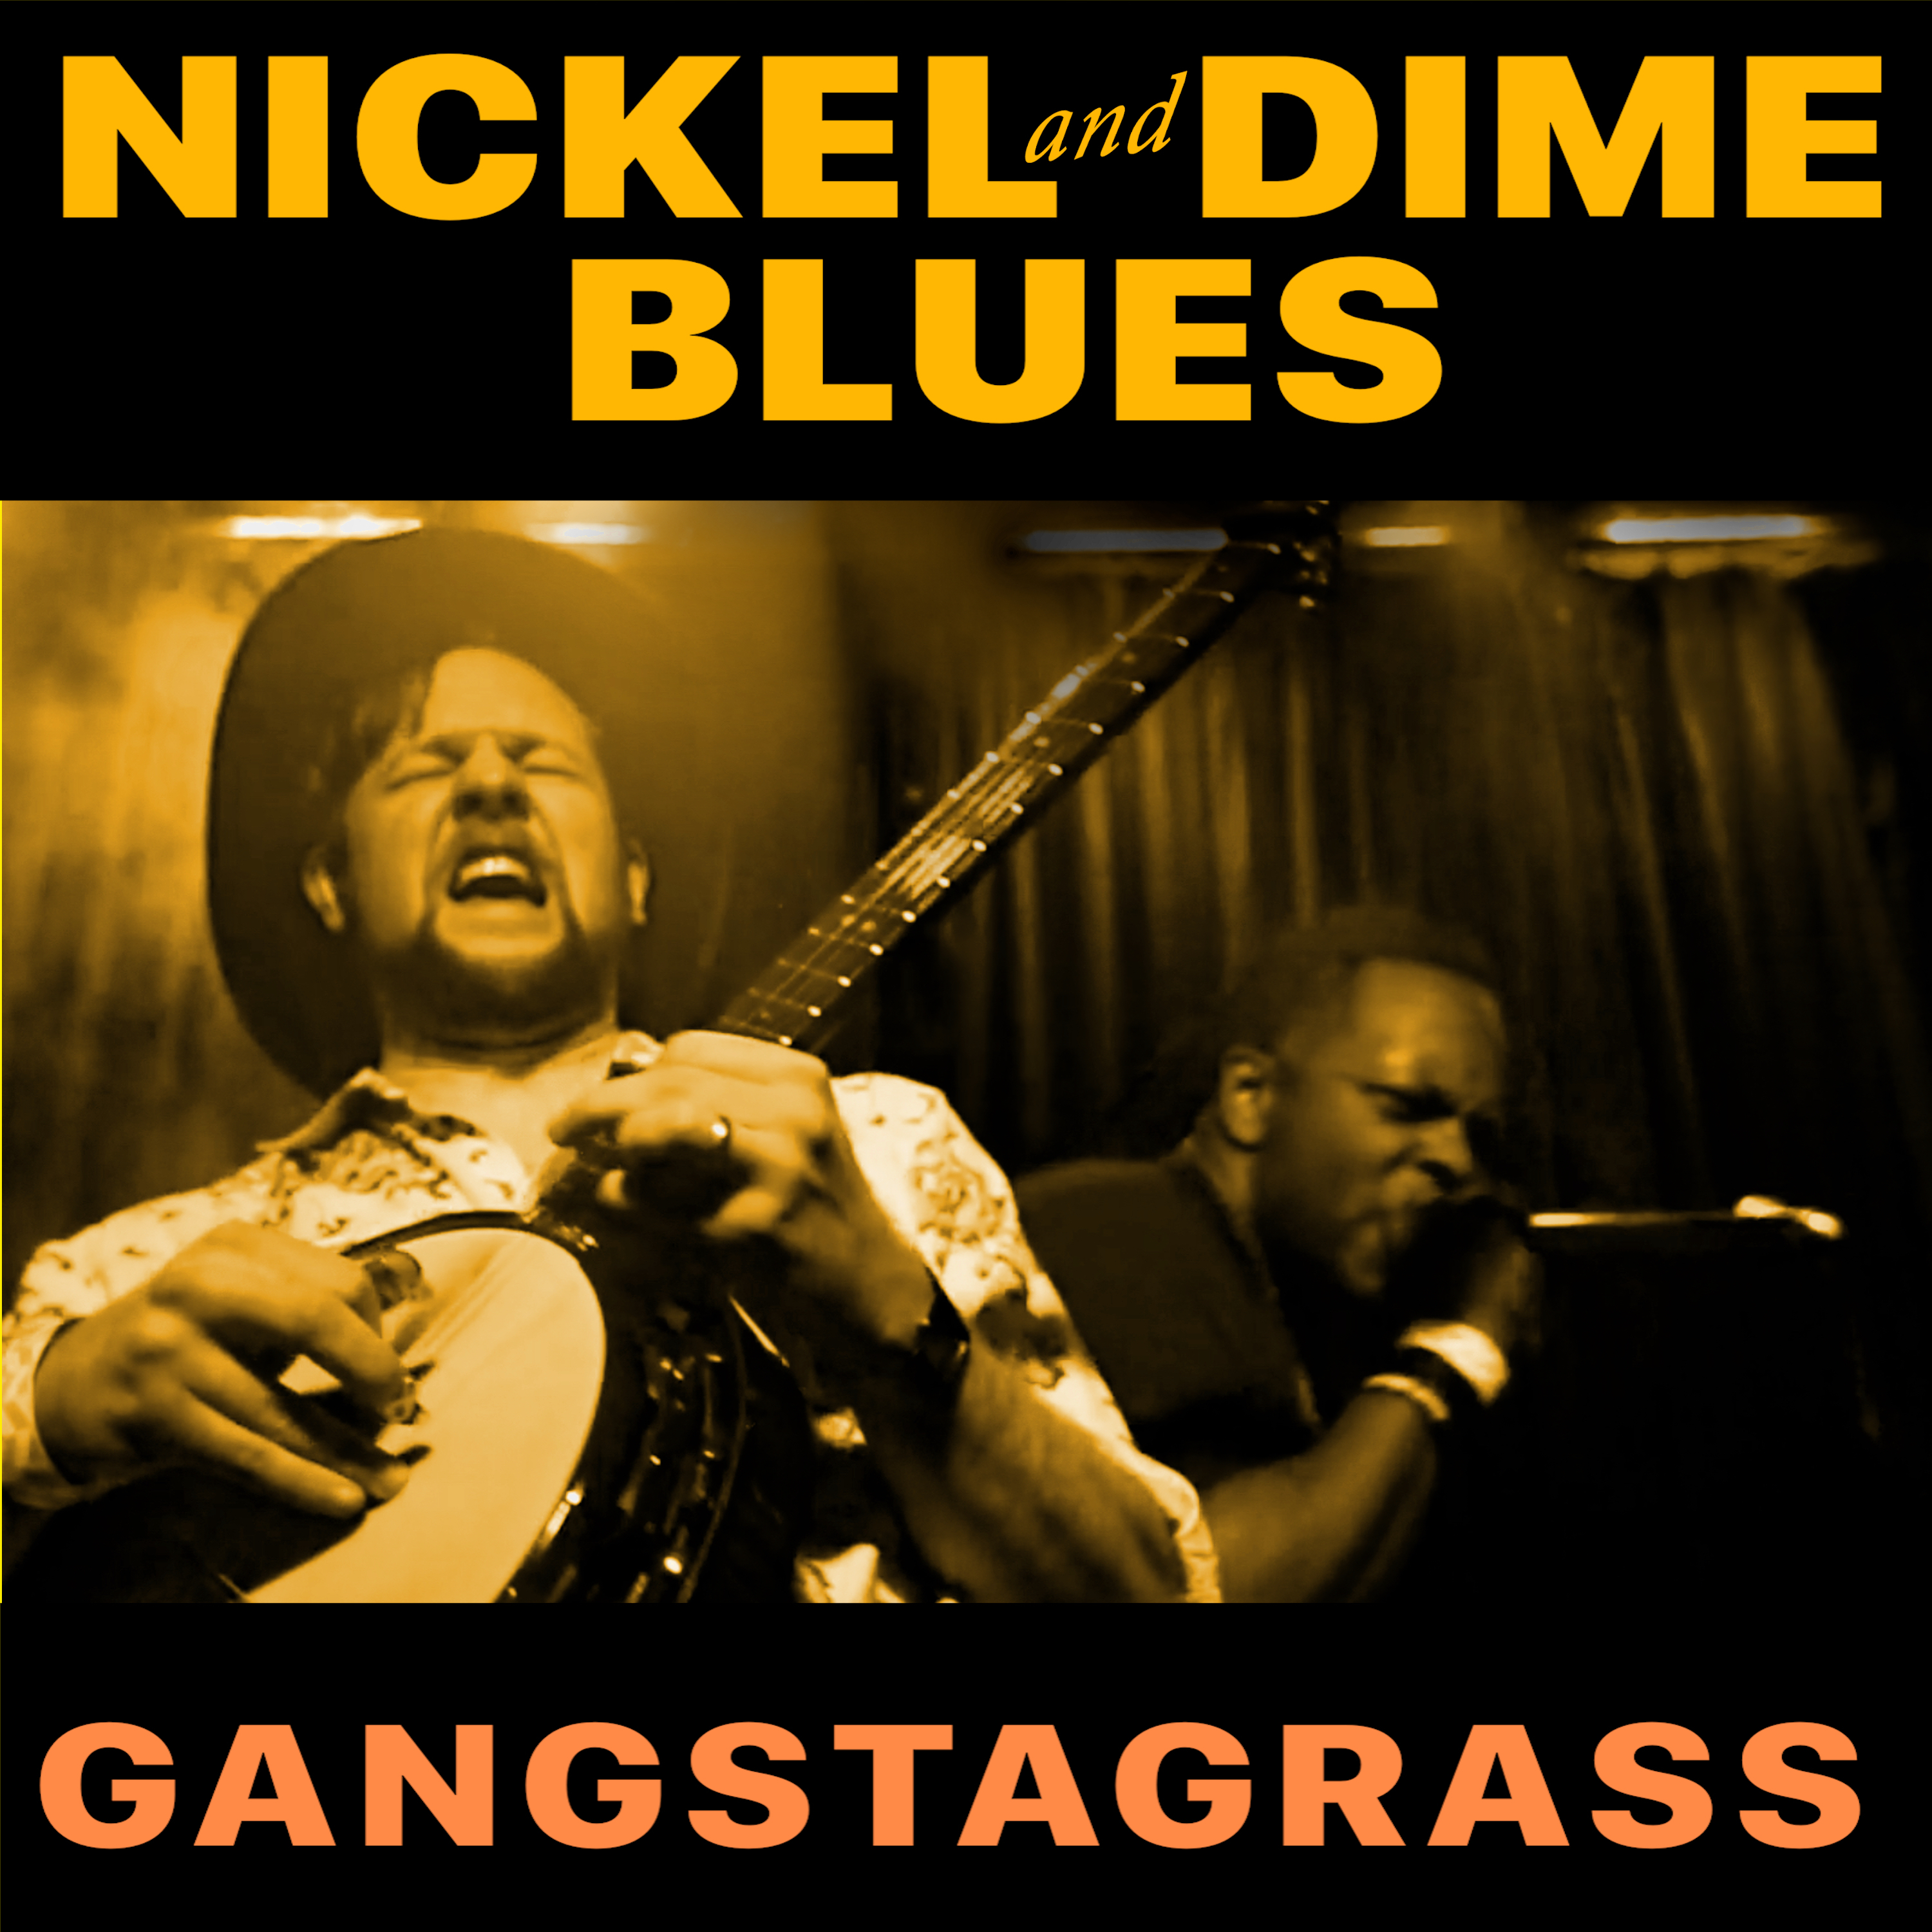 Gangstagrass Release New Single “Nickel and Dime Blues”